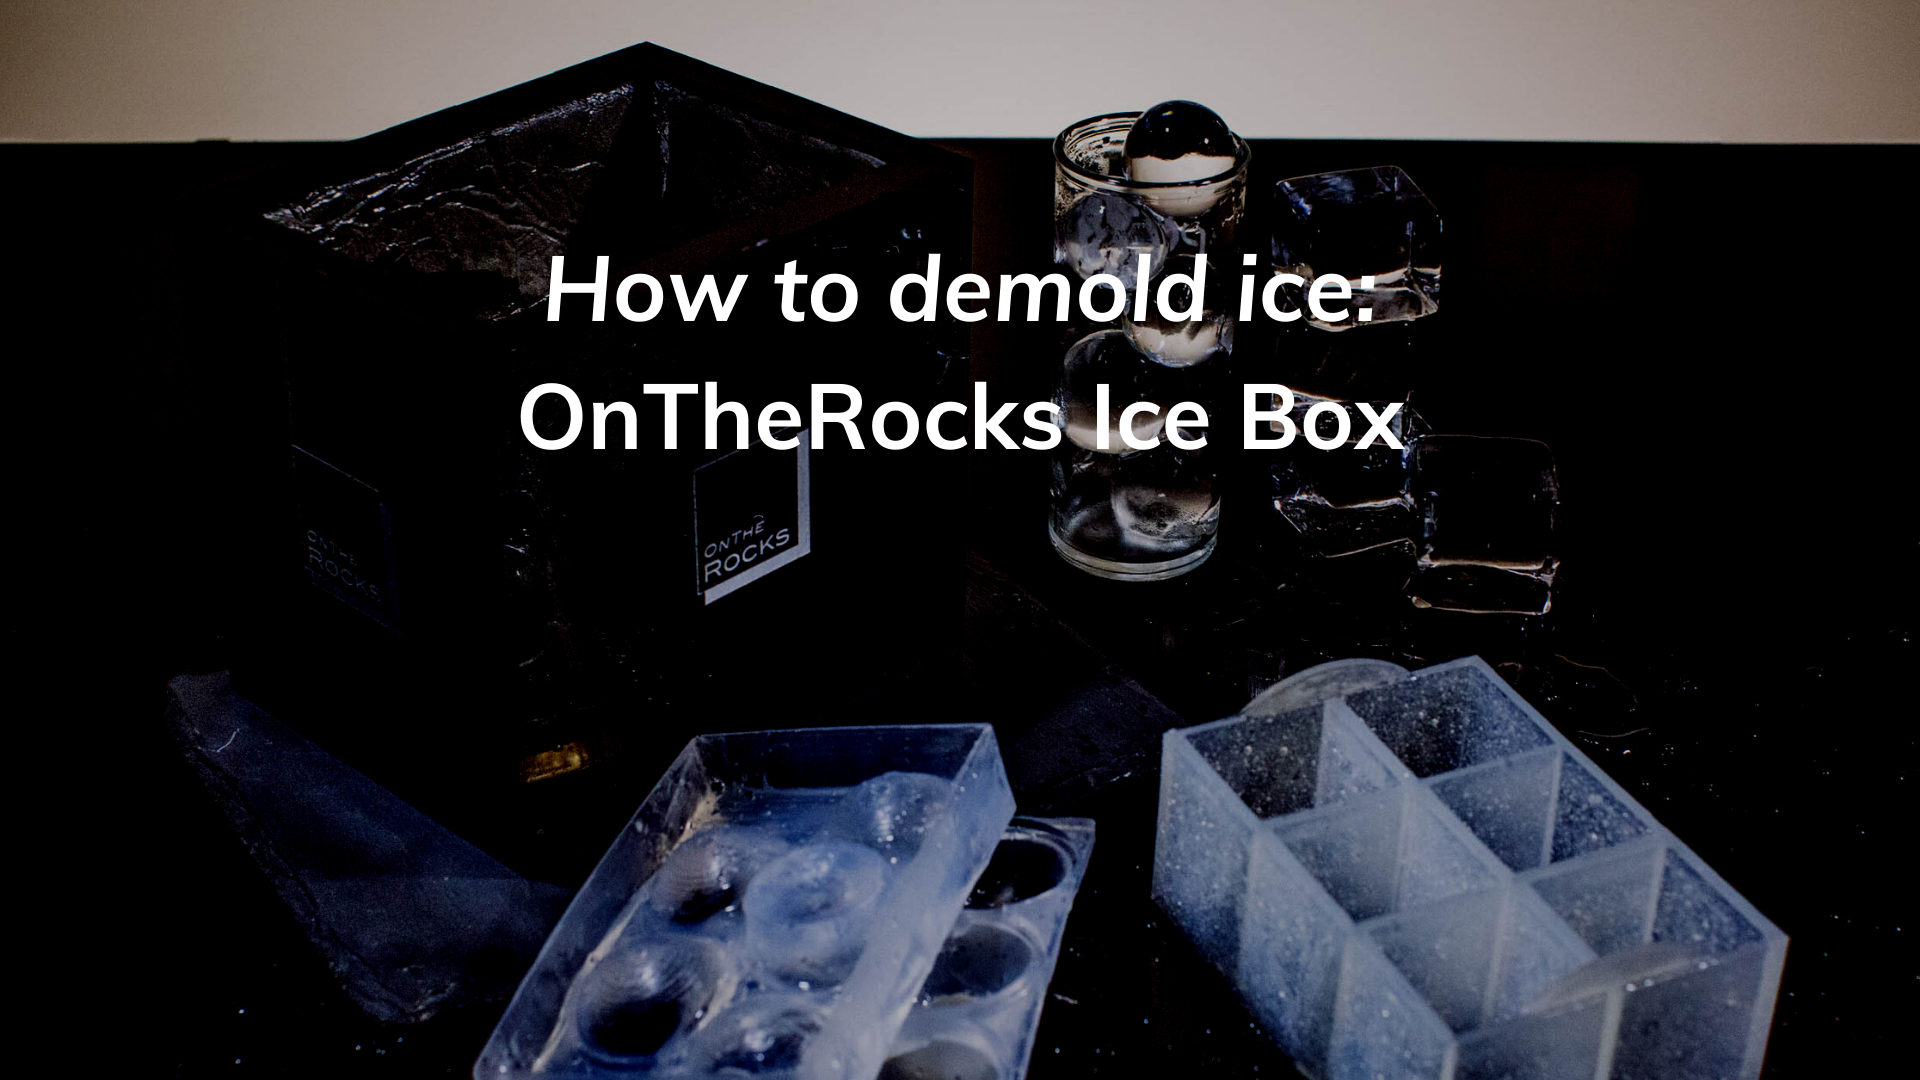 A video showing how to demold the clear ice cubes or spheres made in the OnTheRocks Ice Box